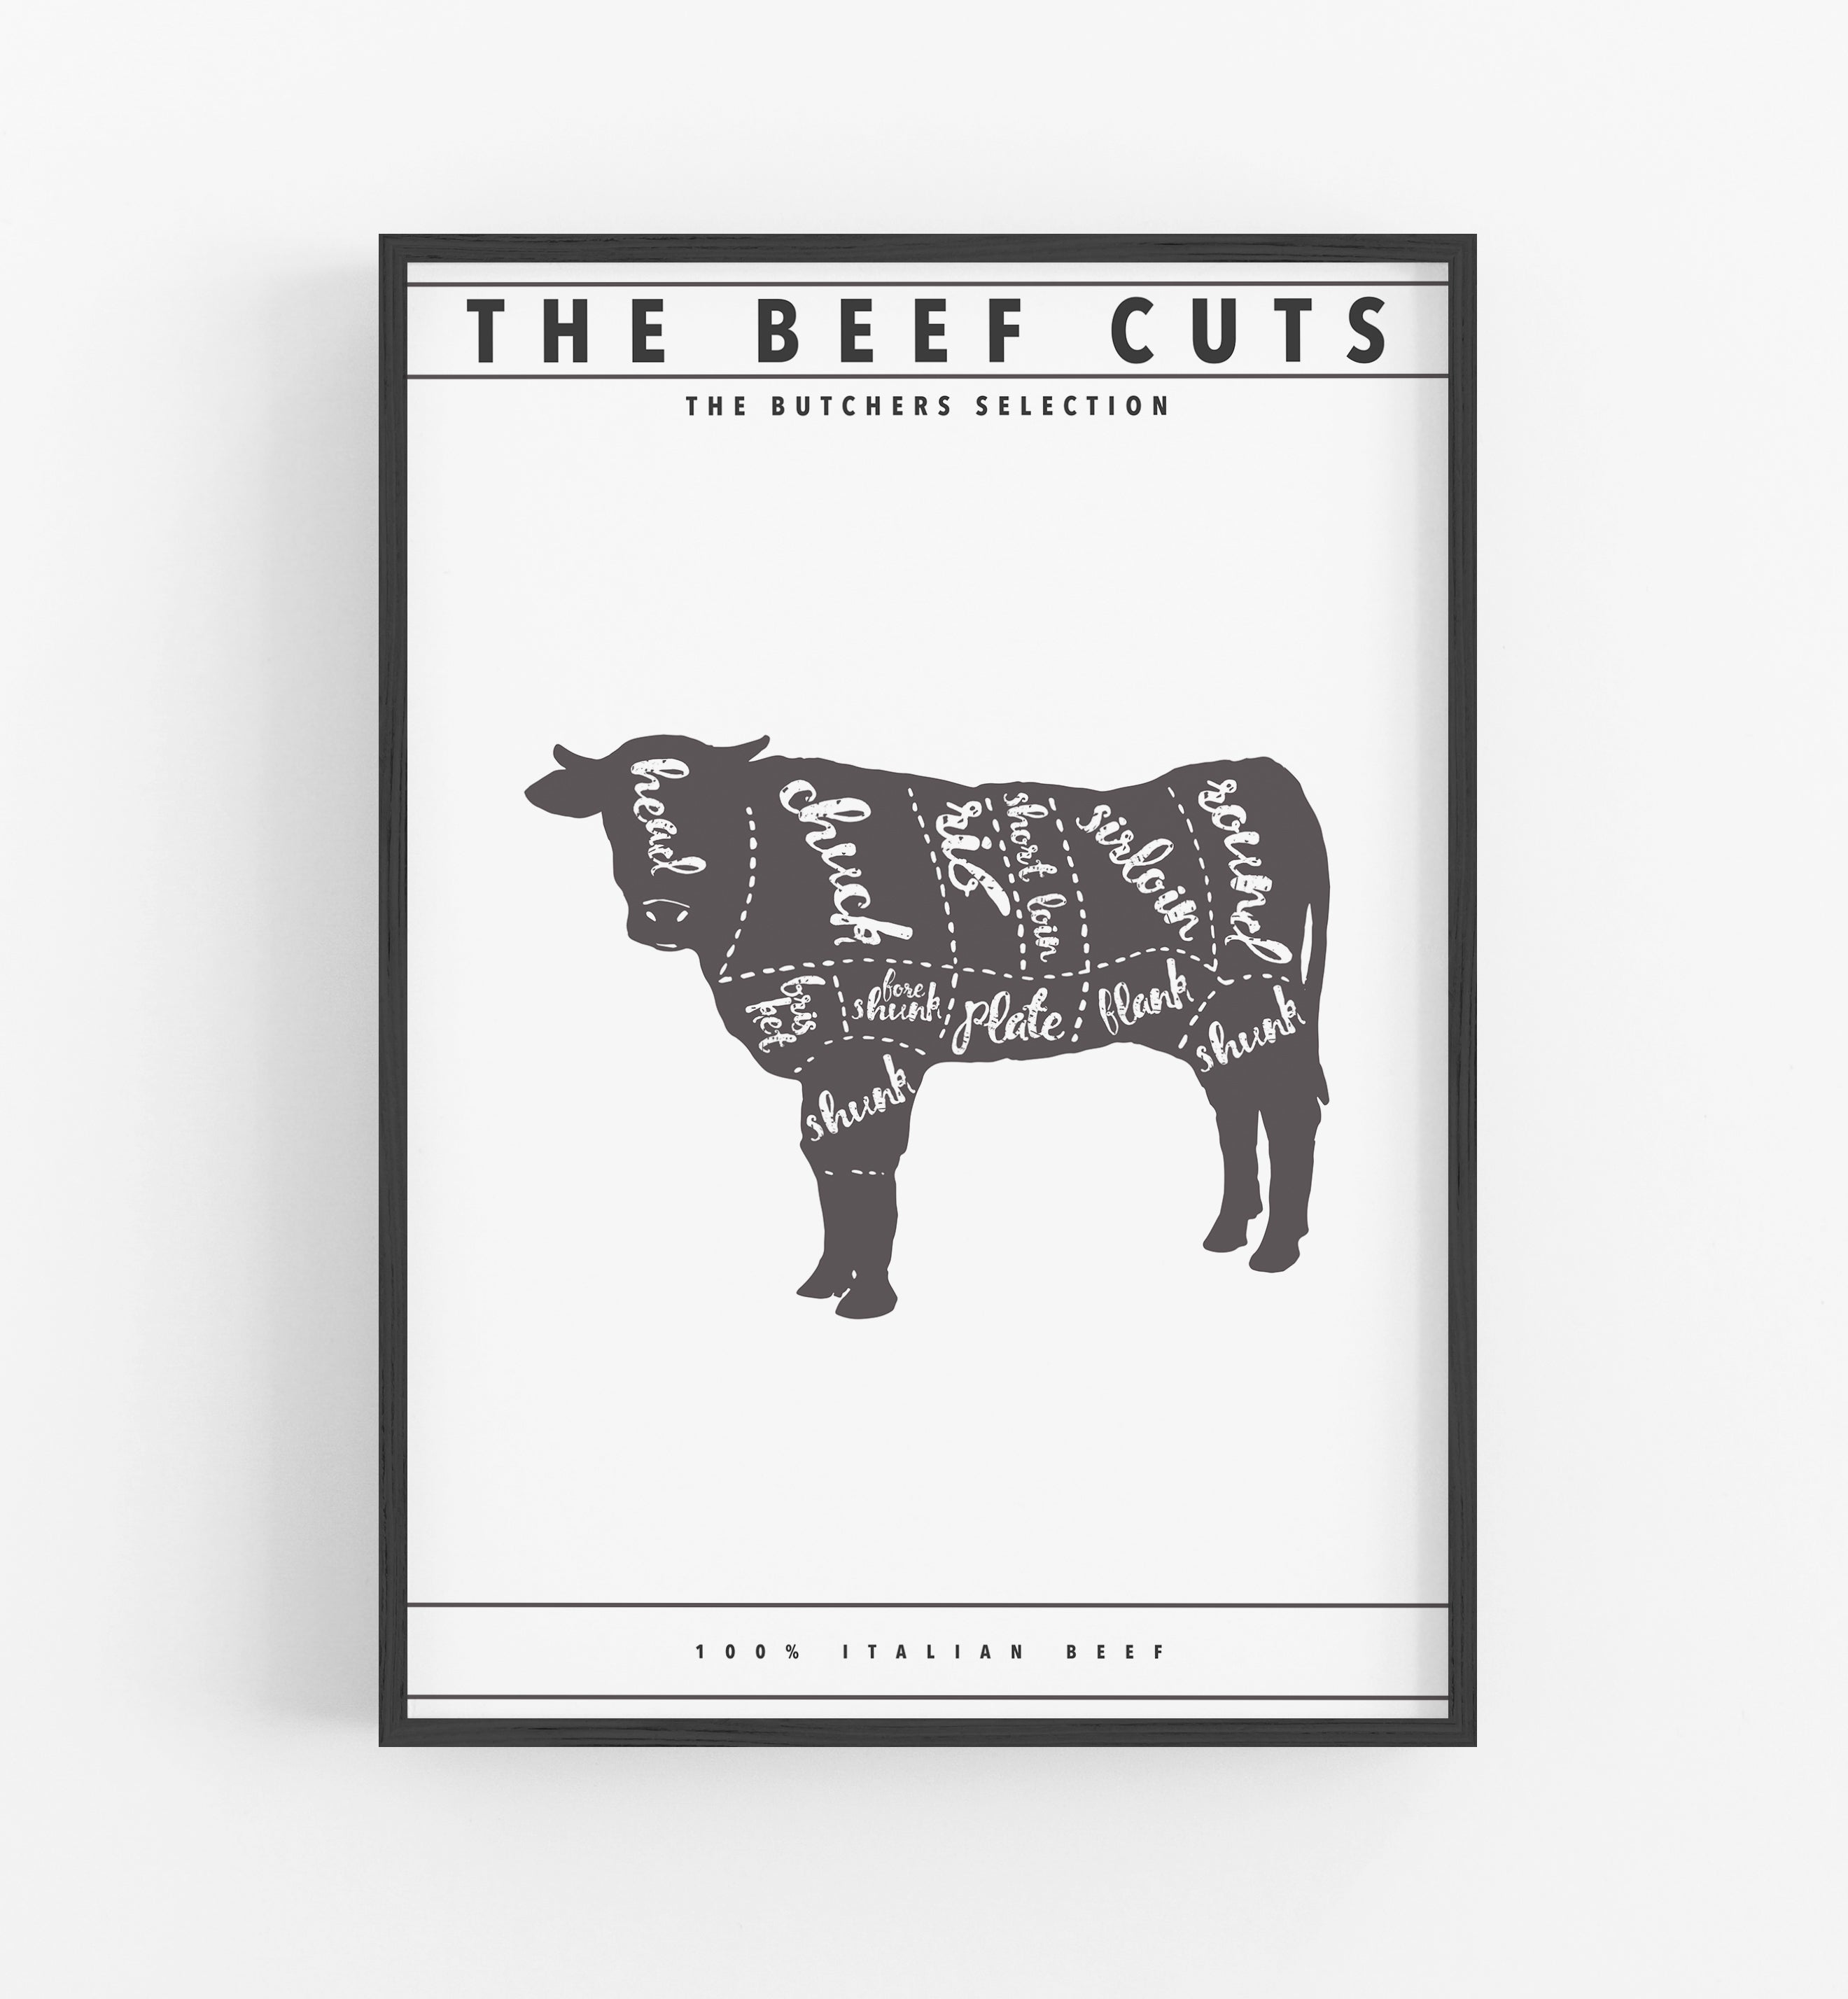 The beef cuts